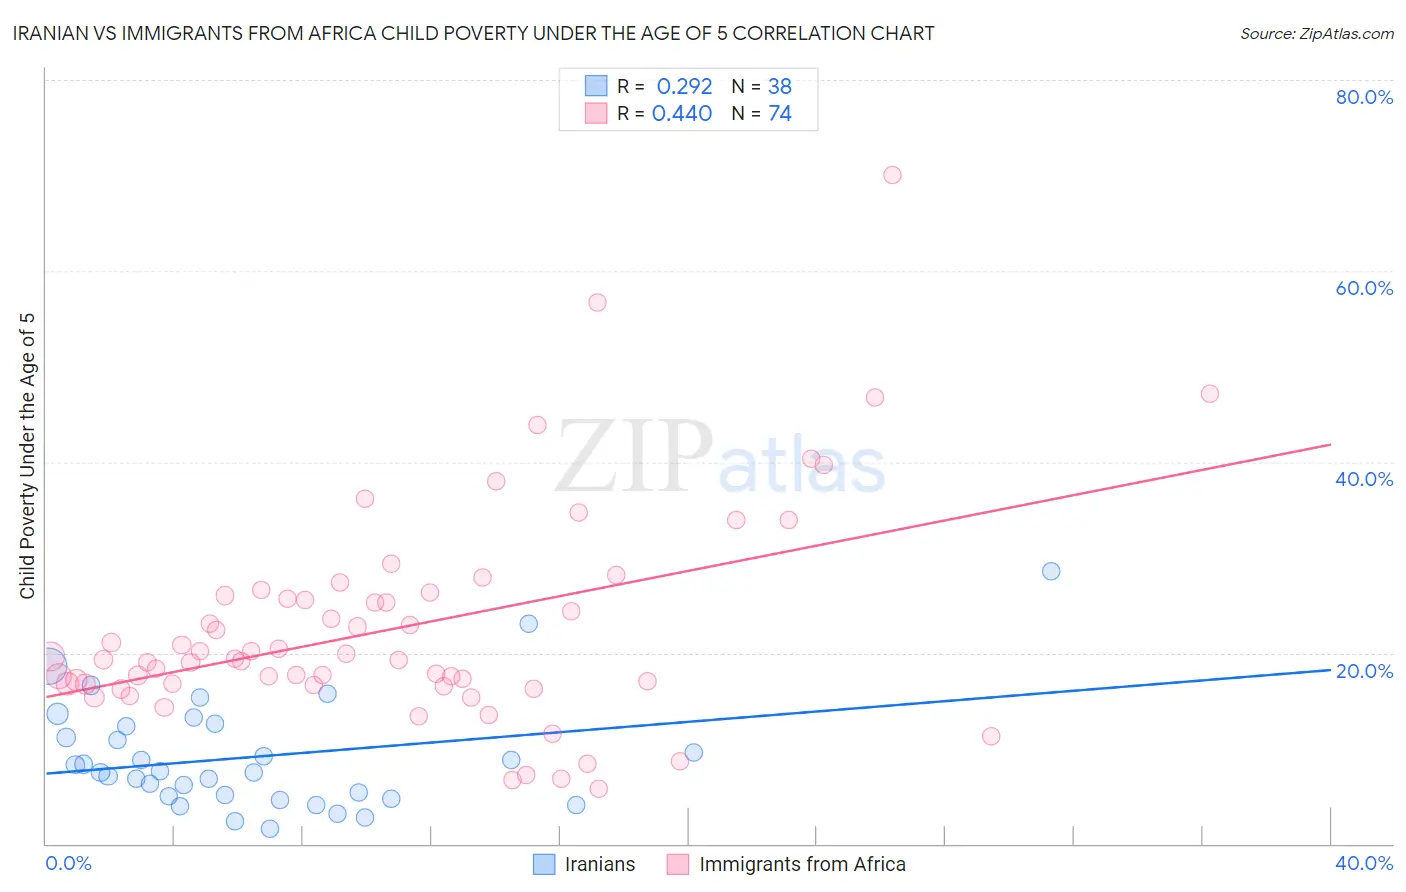 Iranian vs Immigrants from Africa Child Poverty Under the Age of 5